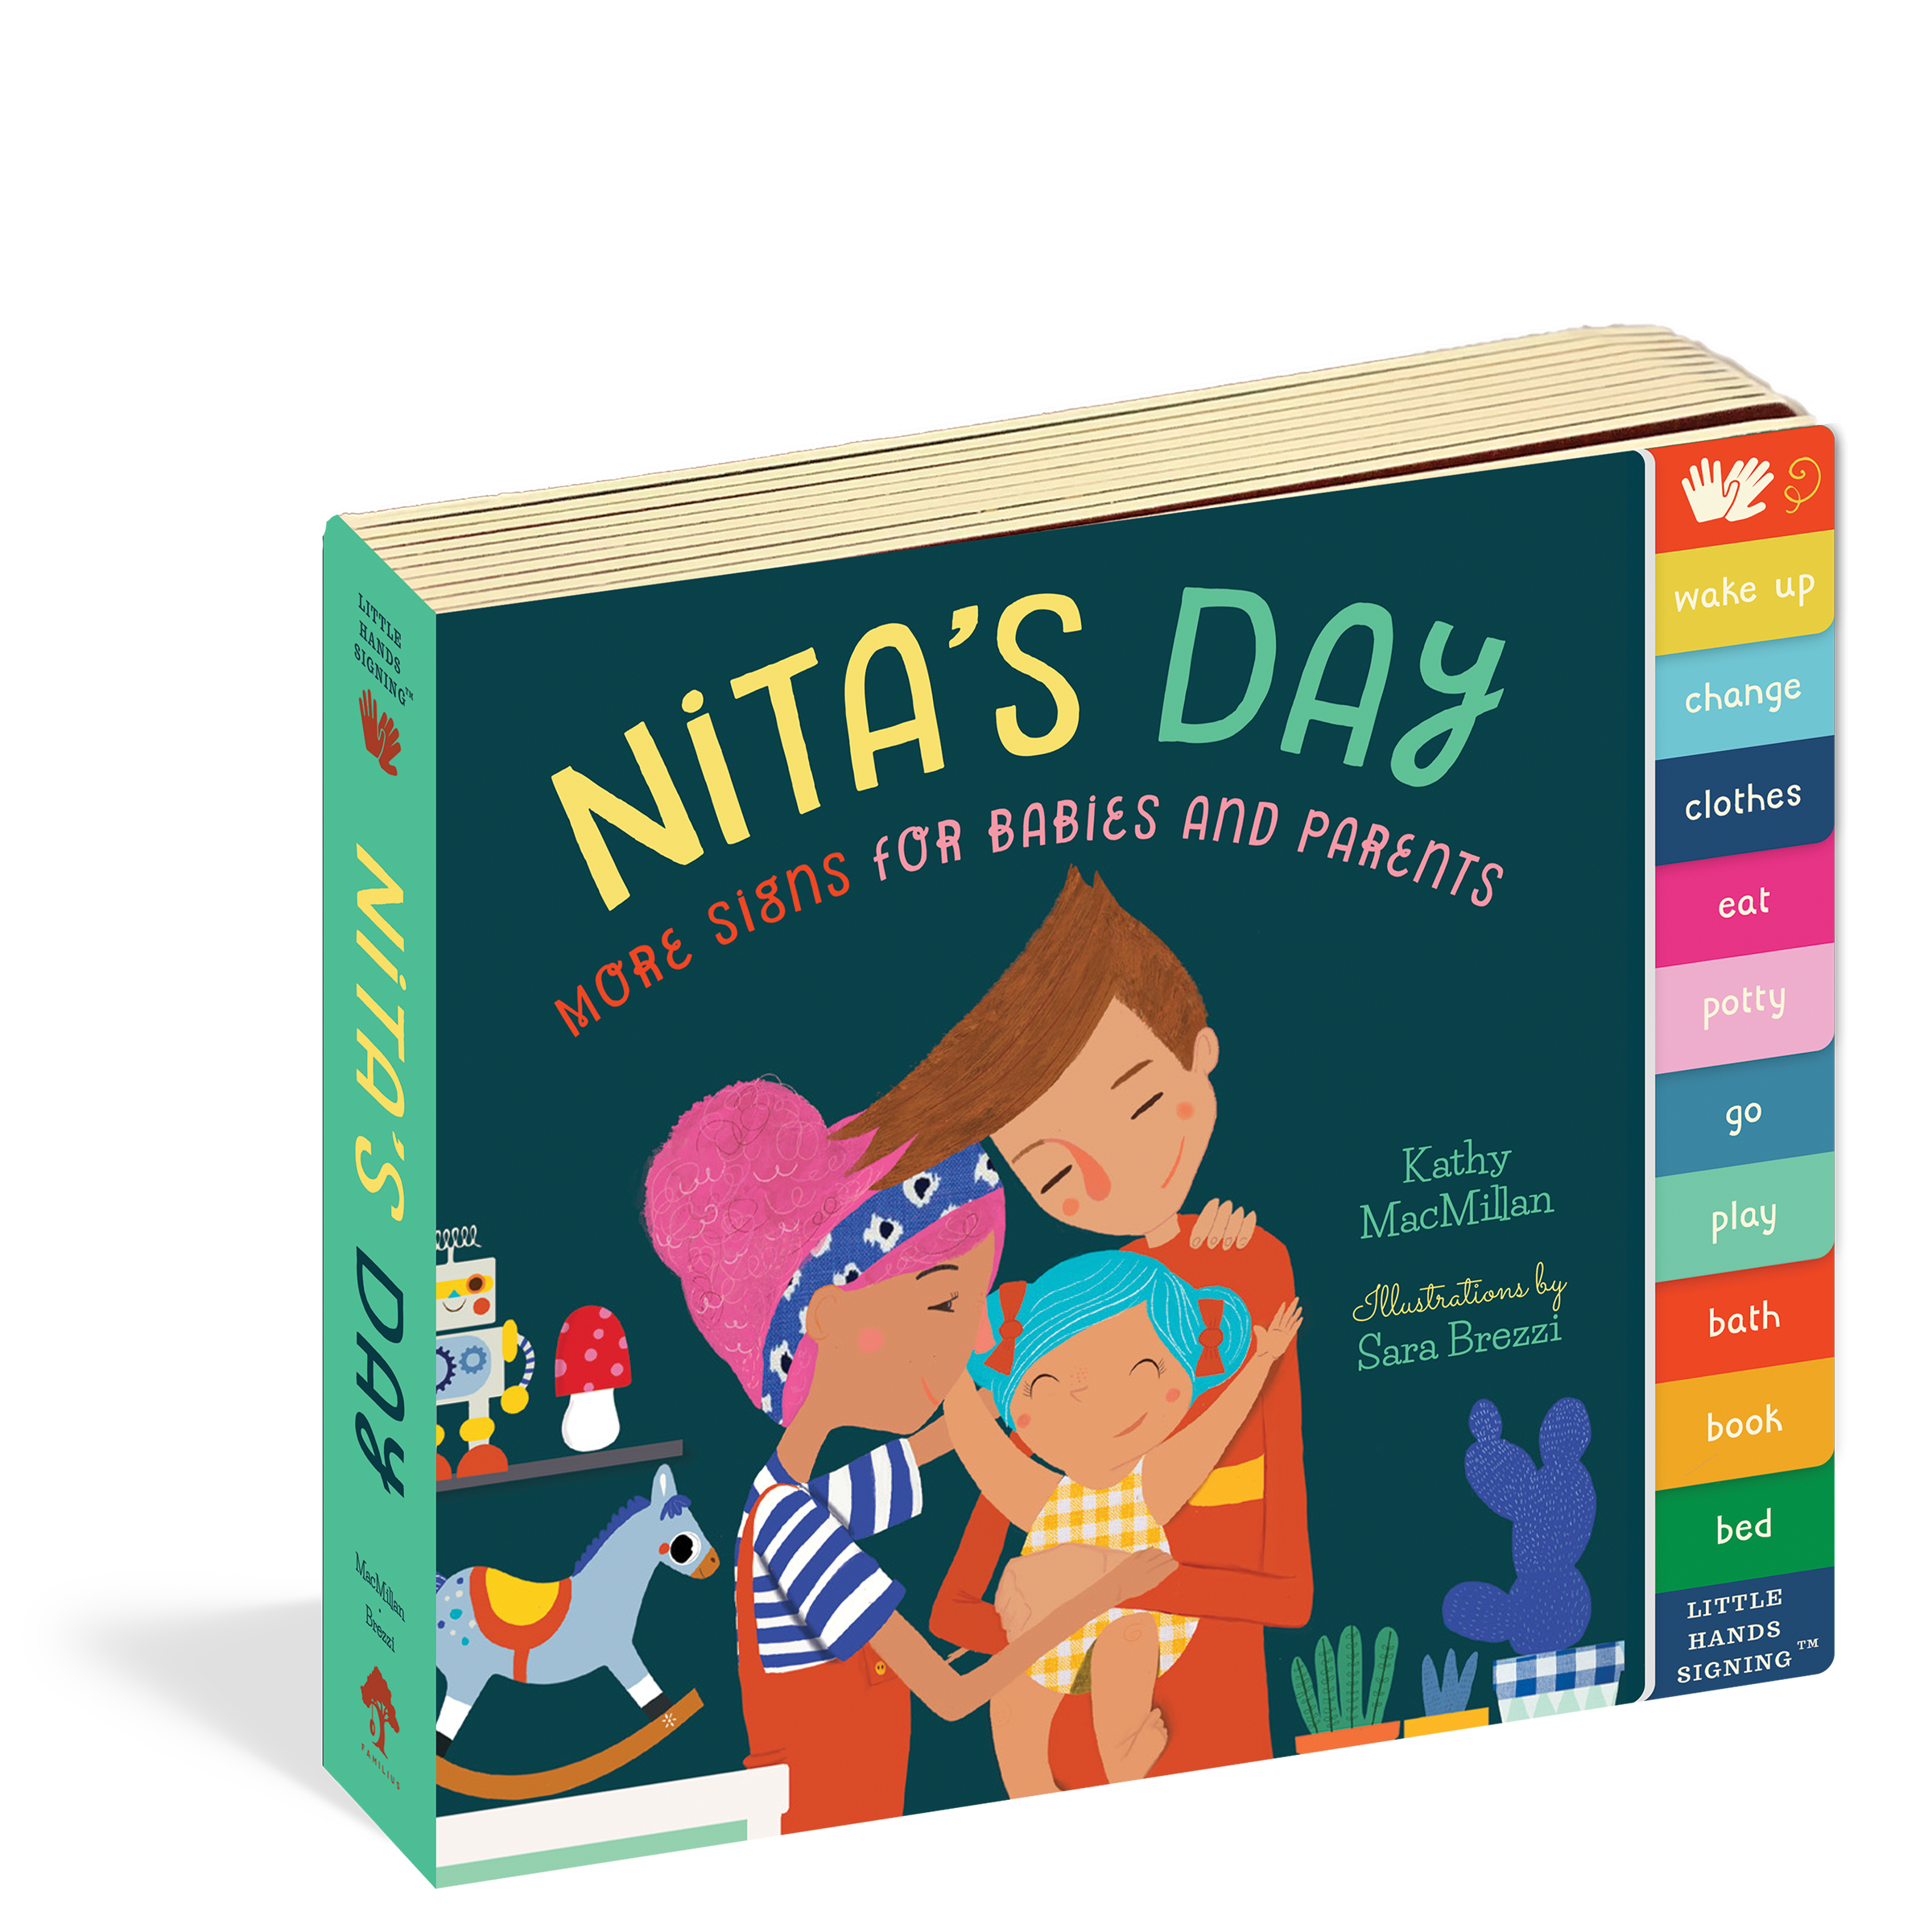 The cover of the board book Nita's Day.